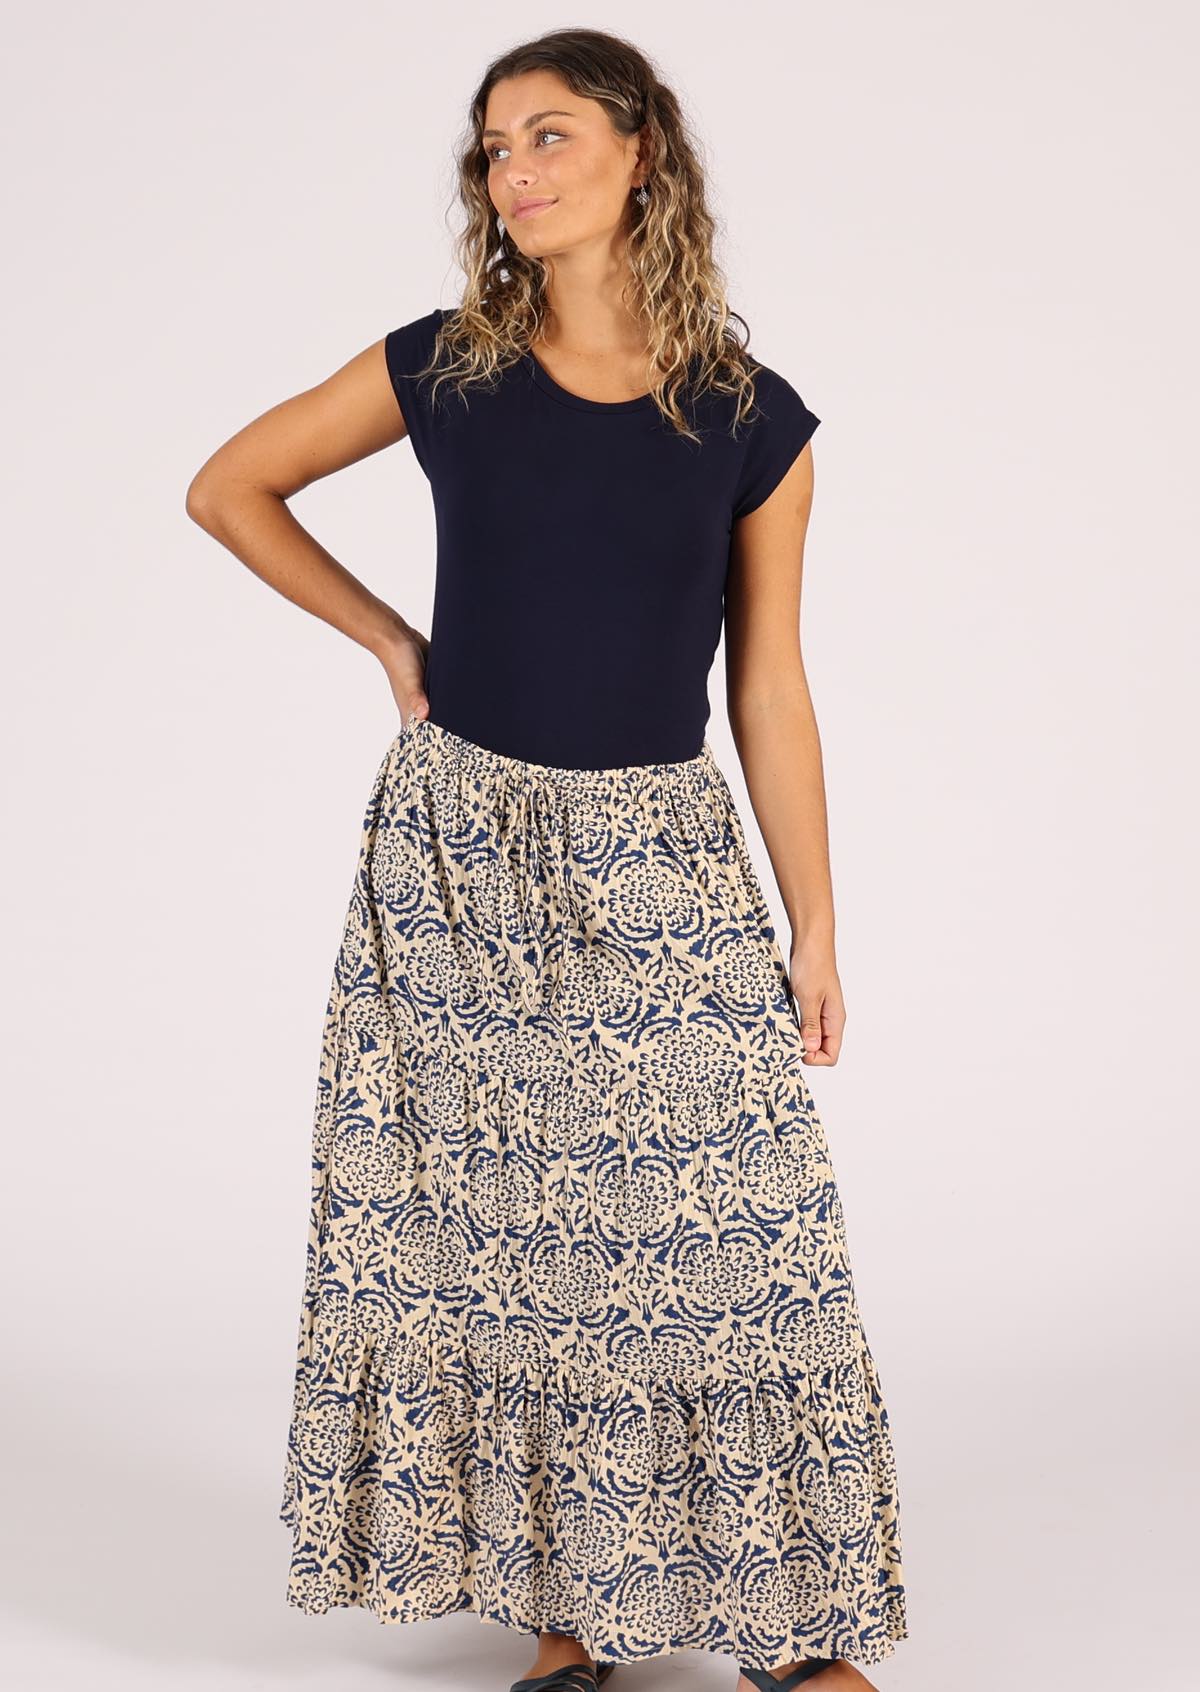 Model wears cotton maxi skirt with drawstring and elasticised waistband